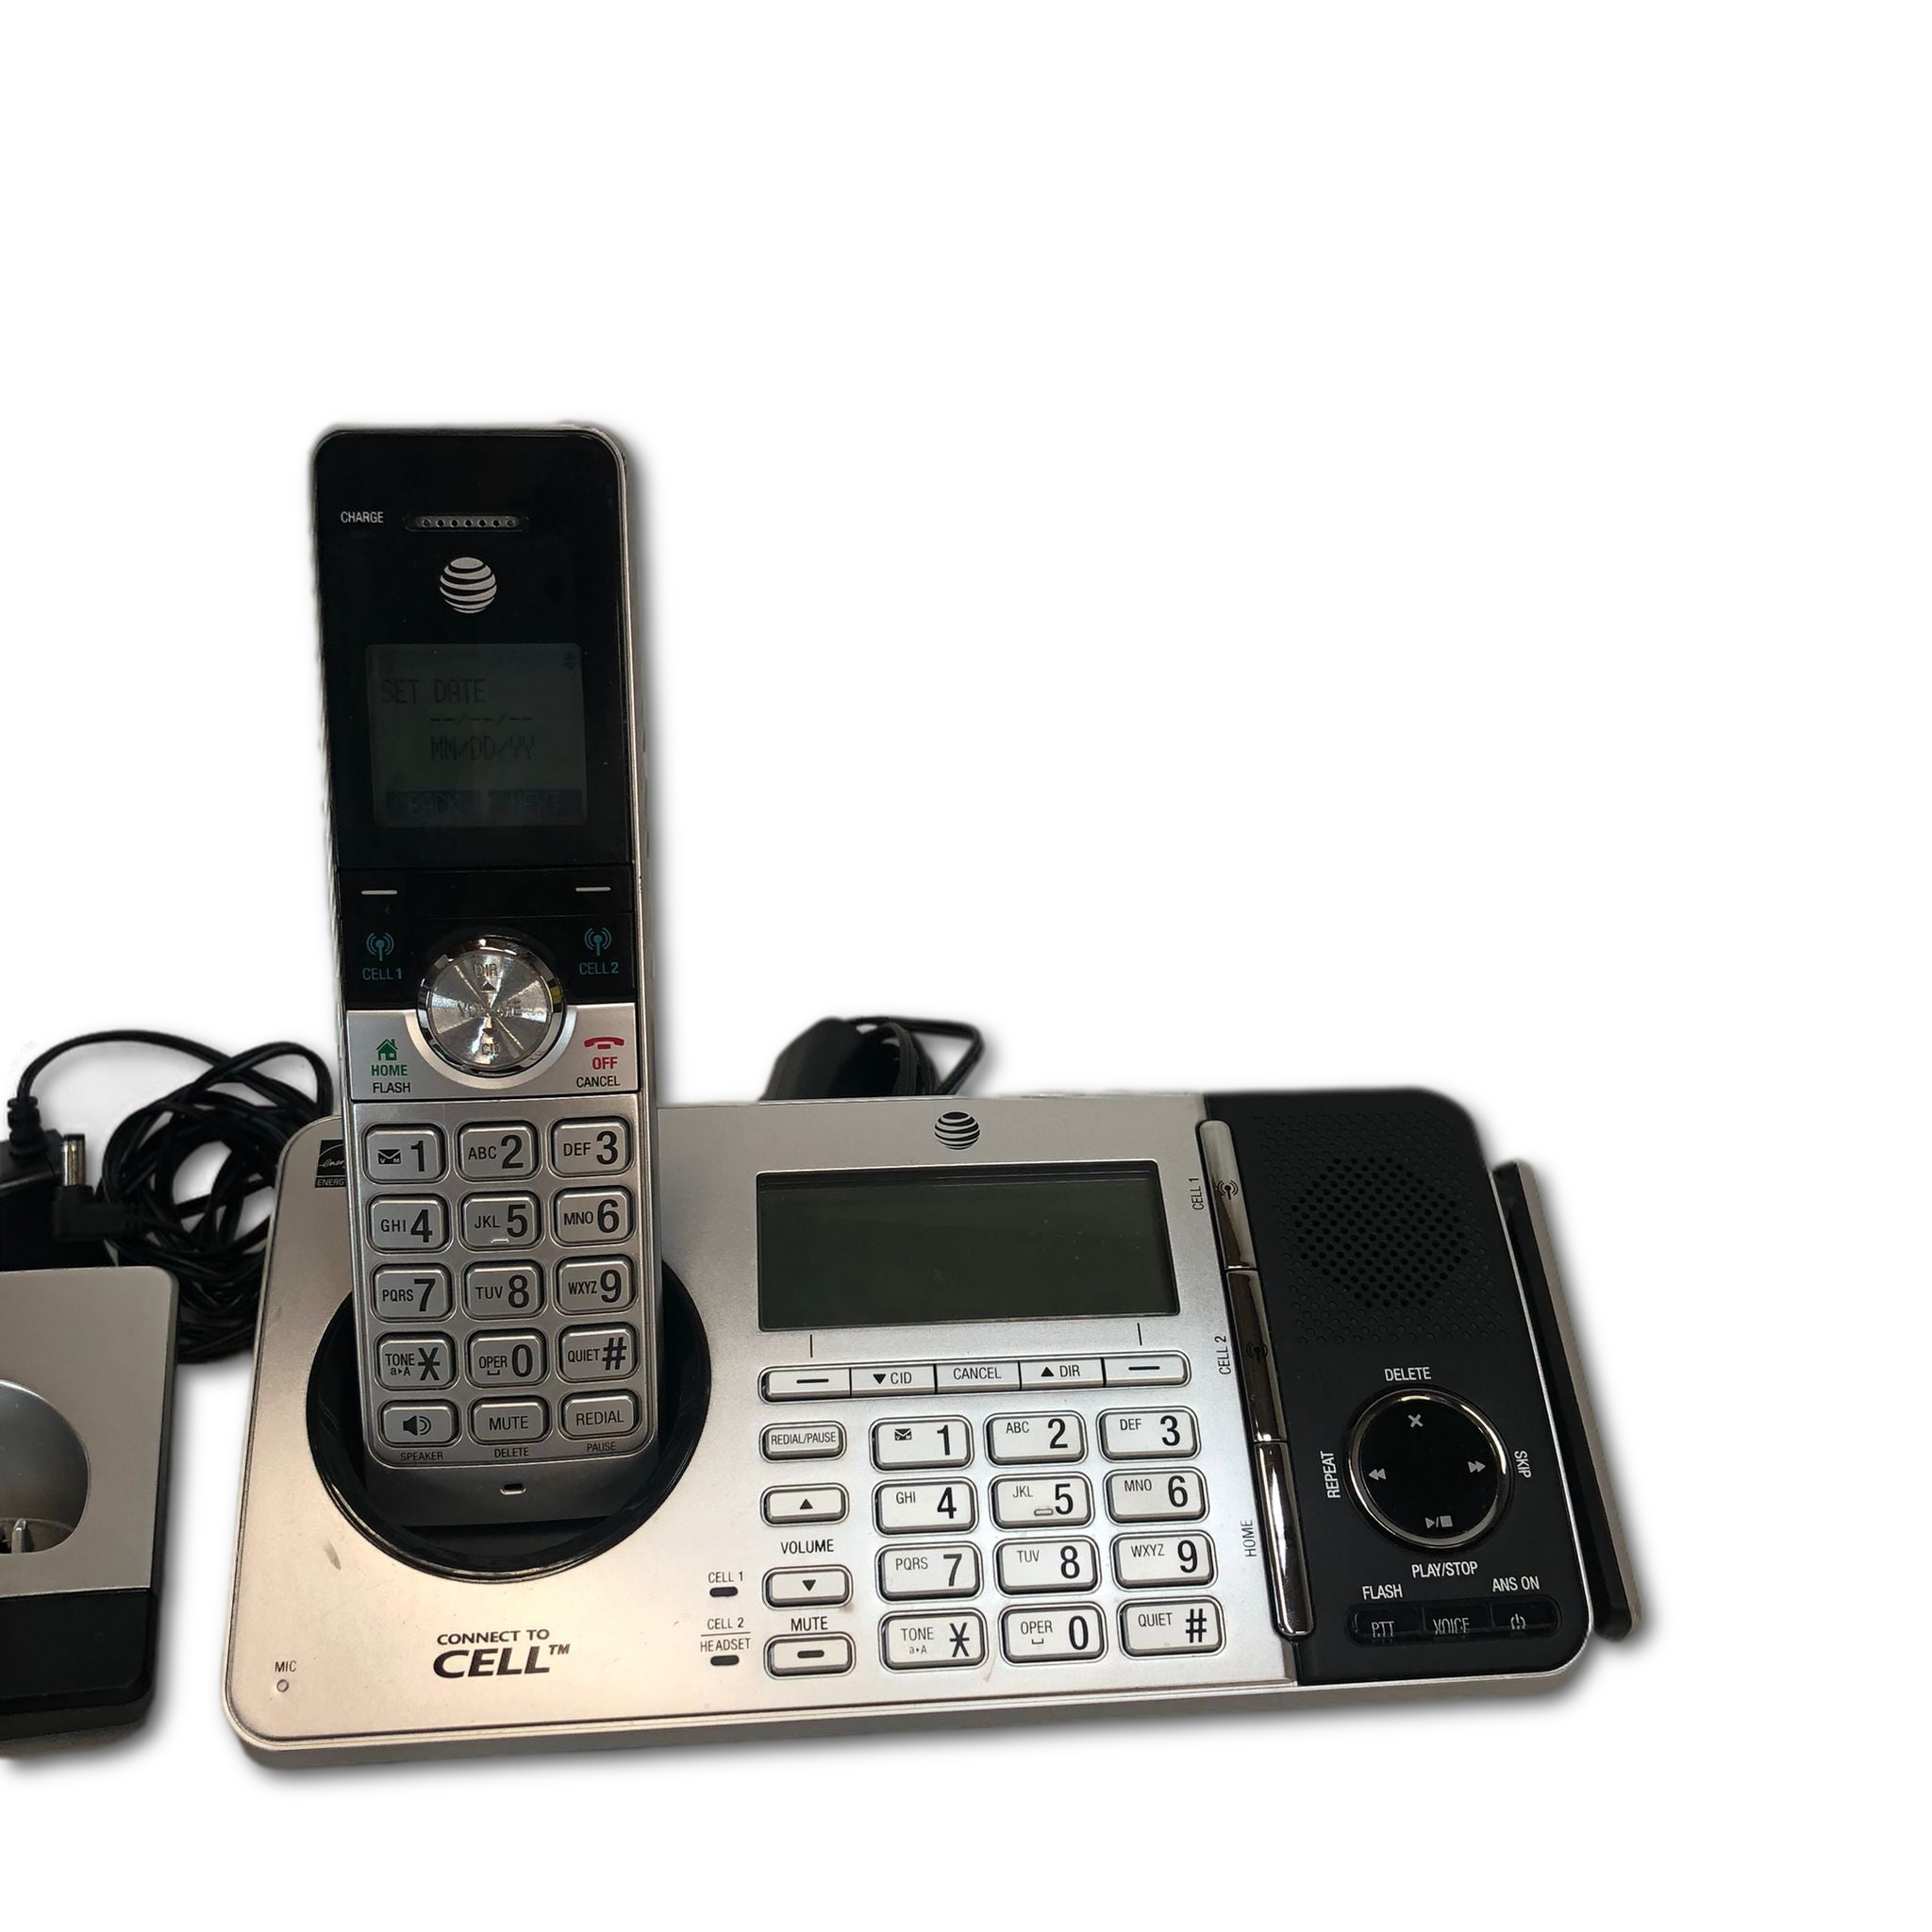 AT&T 3 Handset Connect to Cell Answering System - Lightly Used